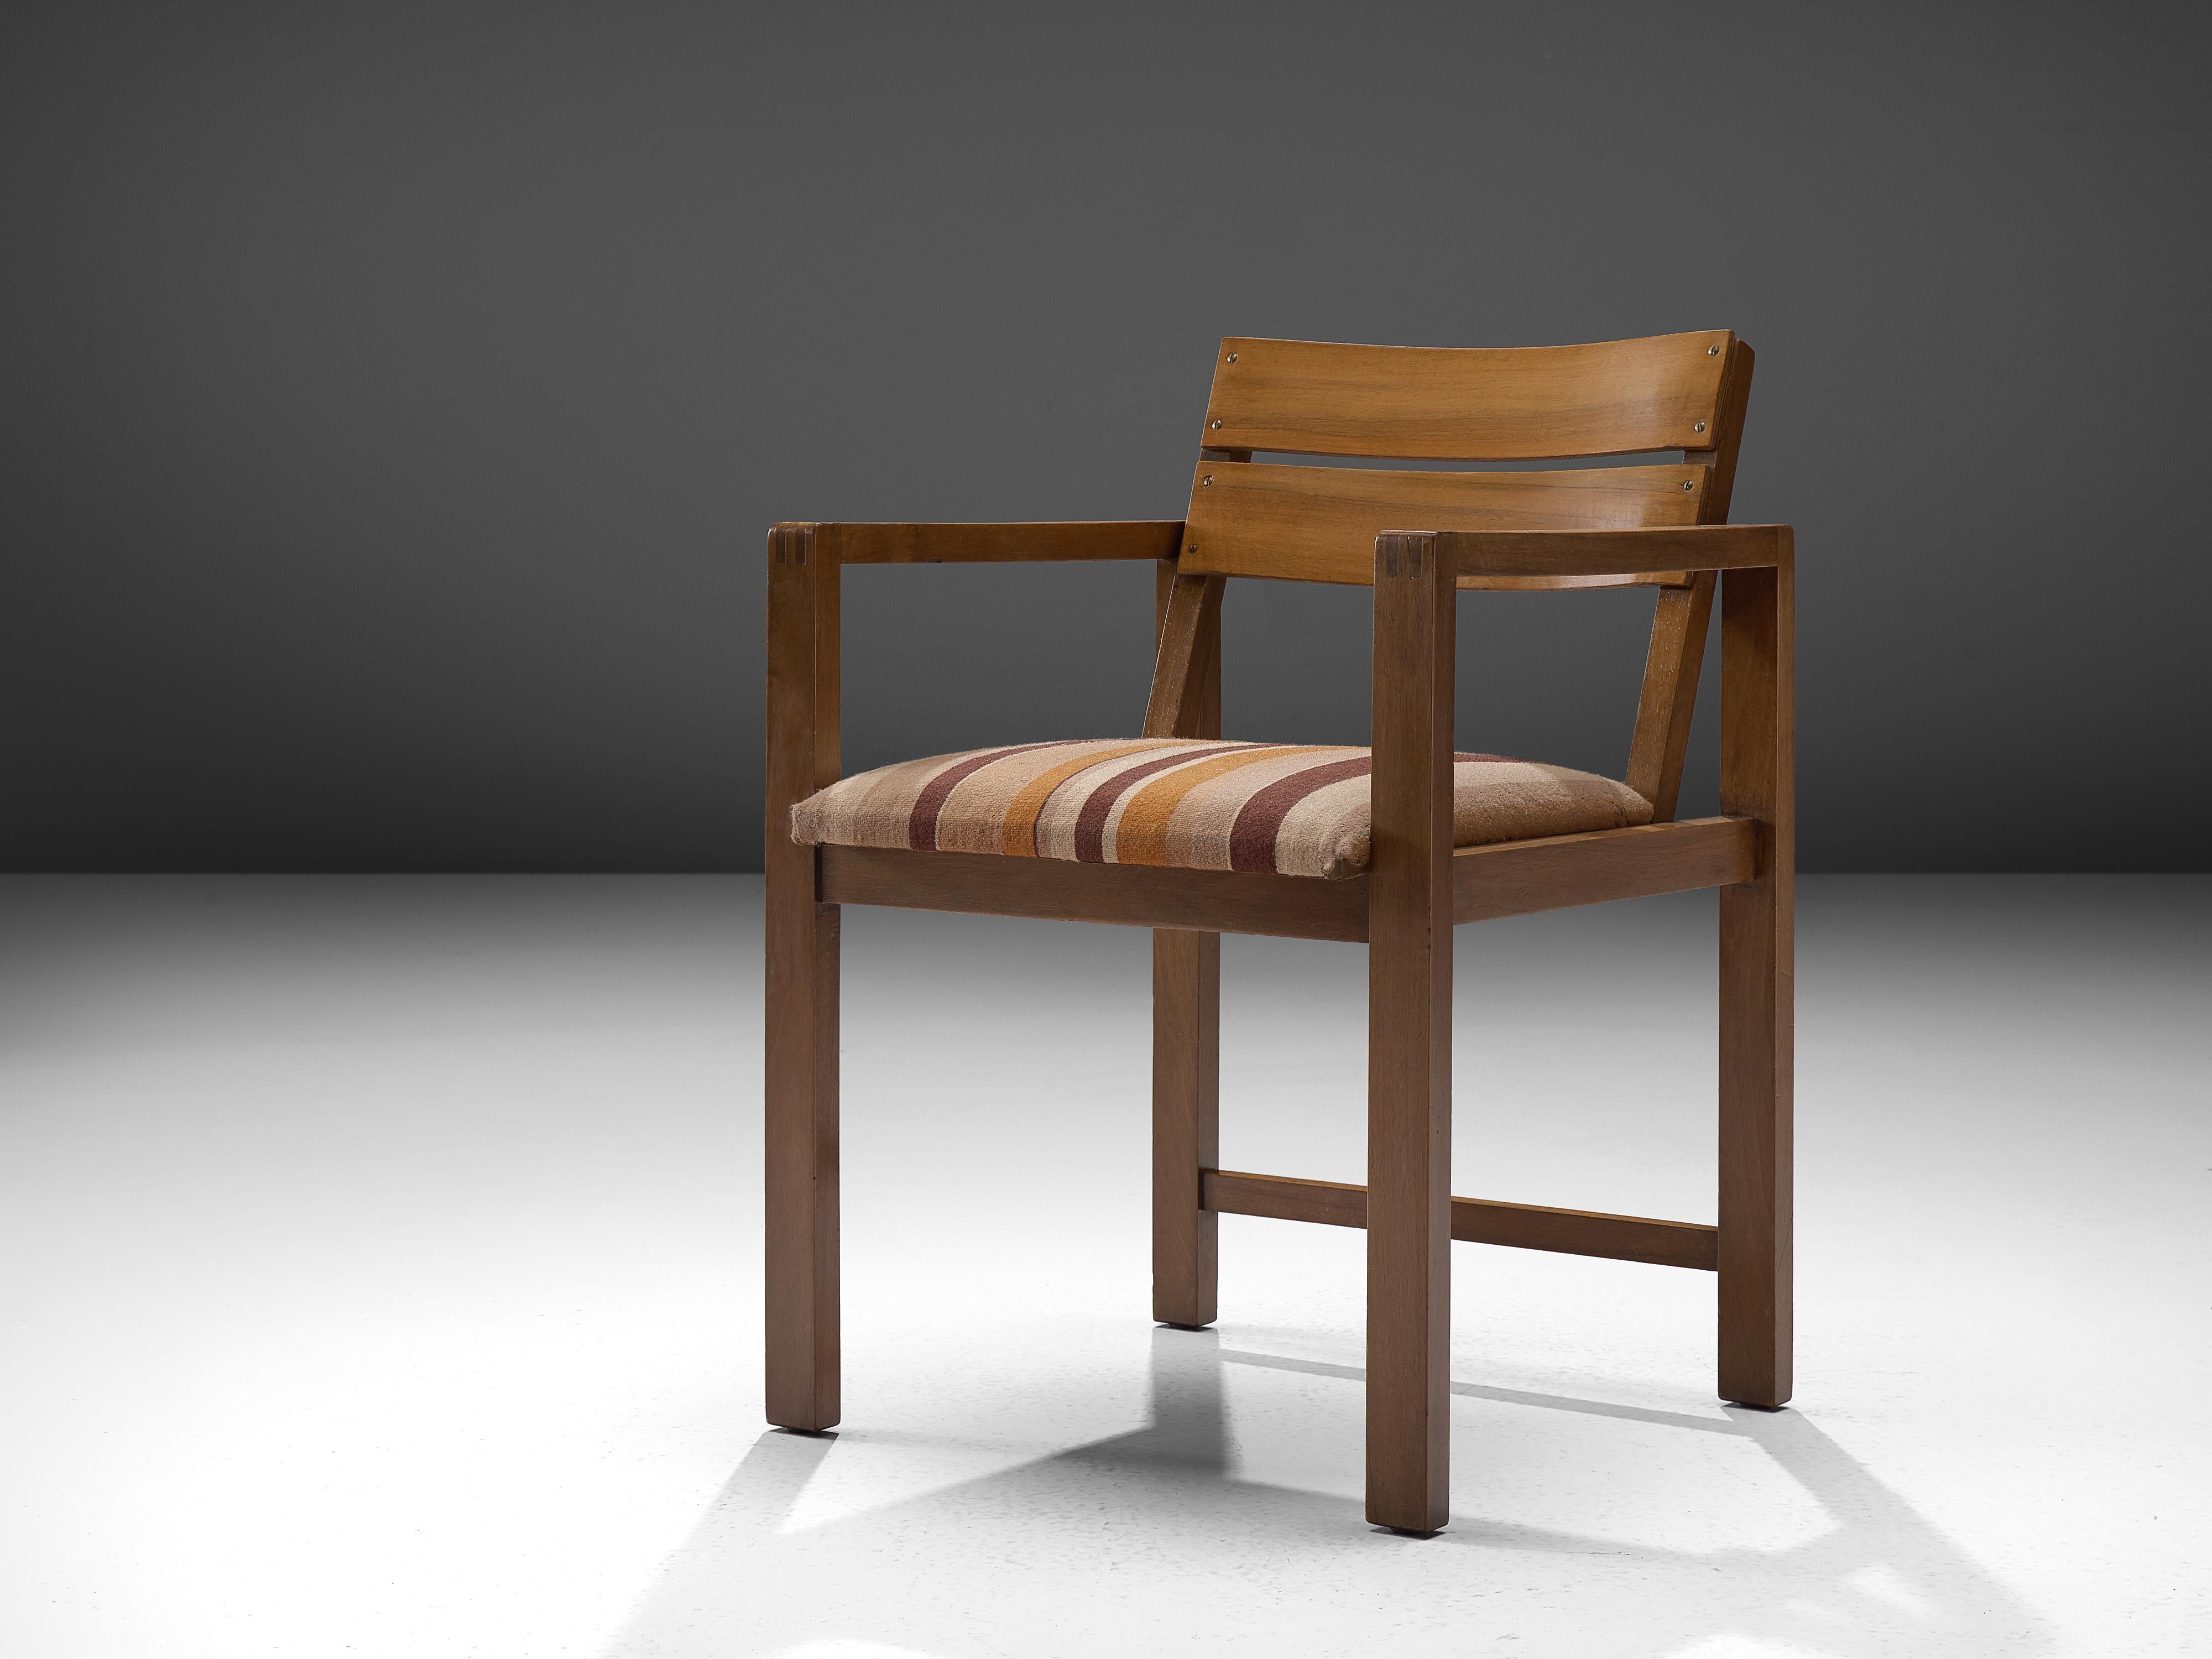 Erich Dieckmann, armchair model 'M42', walnut and fabric, Germany, 1930s

This is a rare Bauhaus armchair by the German designer Erich Dieckmann created in the 1930s. It's composed of walnut and upholstered with a striped fabric seat. The design